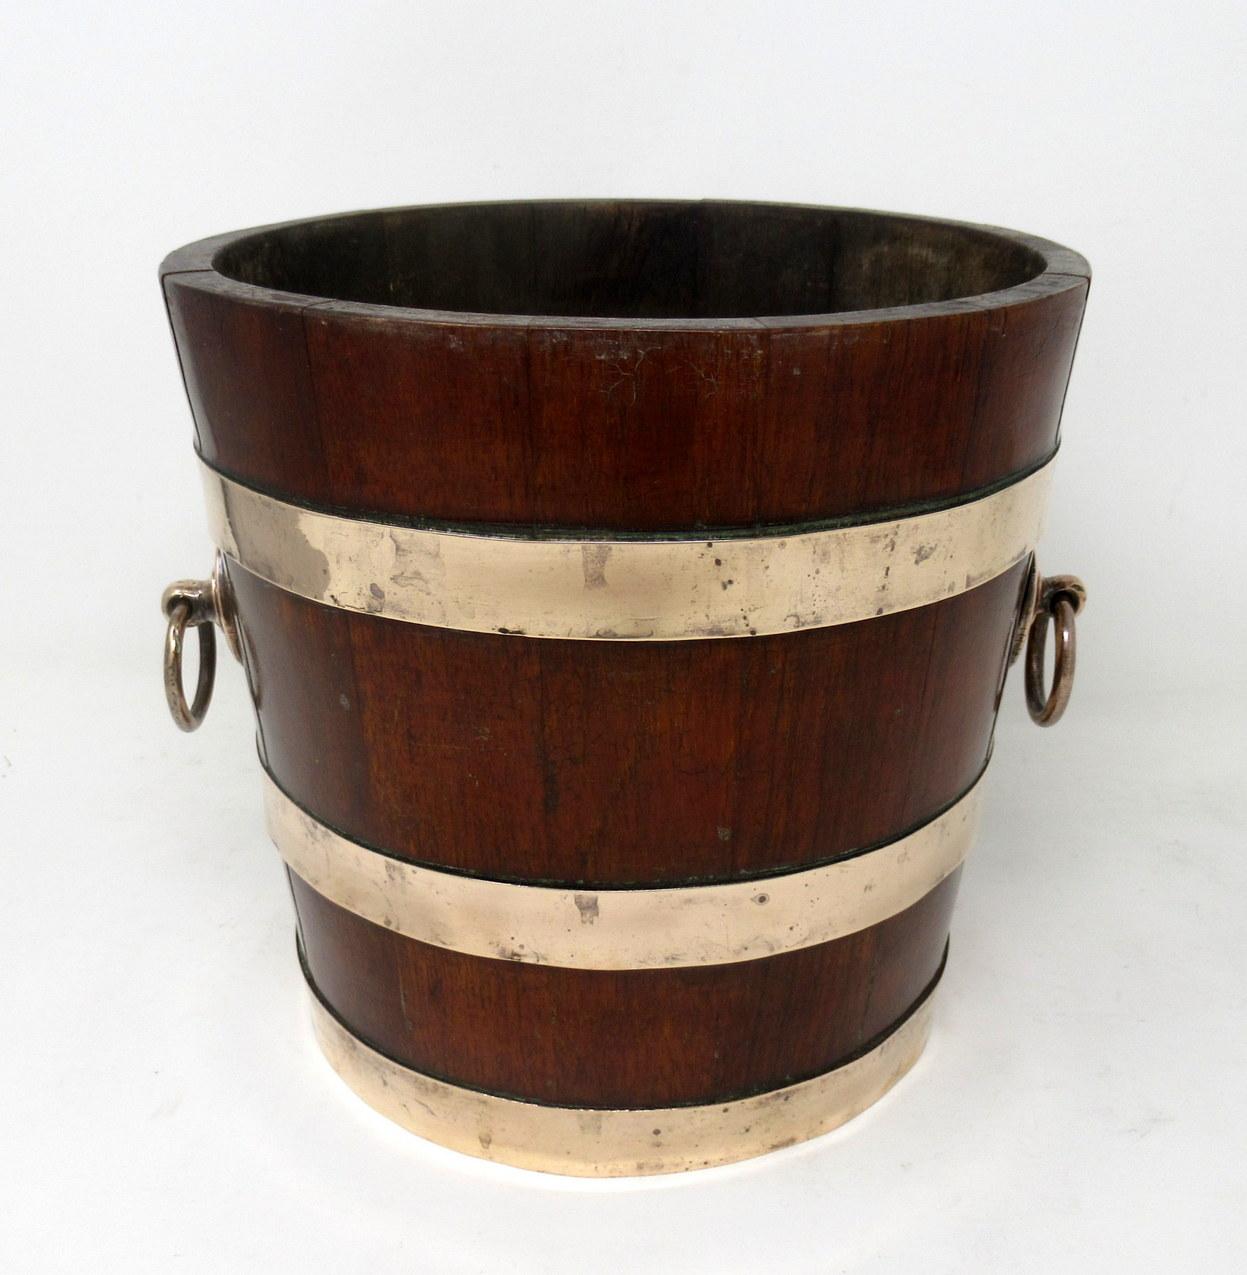 An exceptionally fine quality coopered teak and brass bound circular flower tub, jardinière or wine - champagne bucket holder made by London Cooperage H M Champion & Co.

Third quarter of the 19th century 

The main polished Teak frame bound